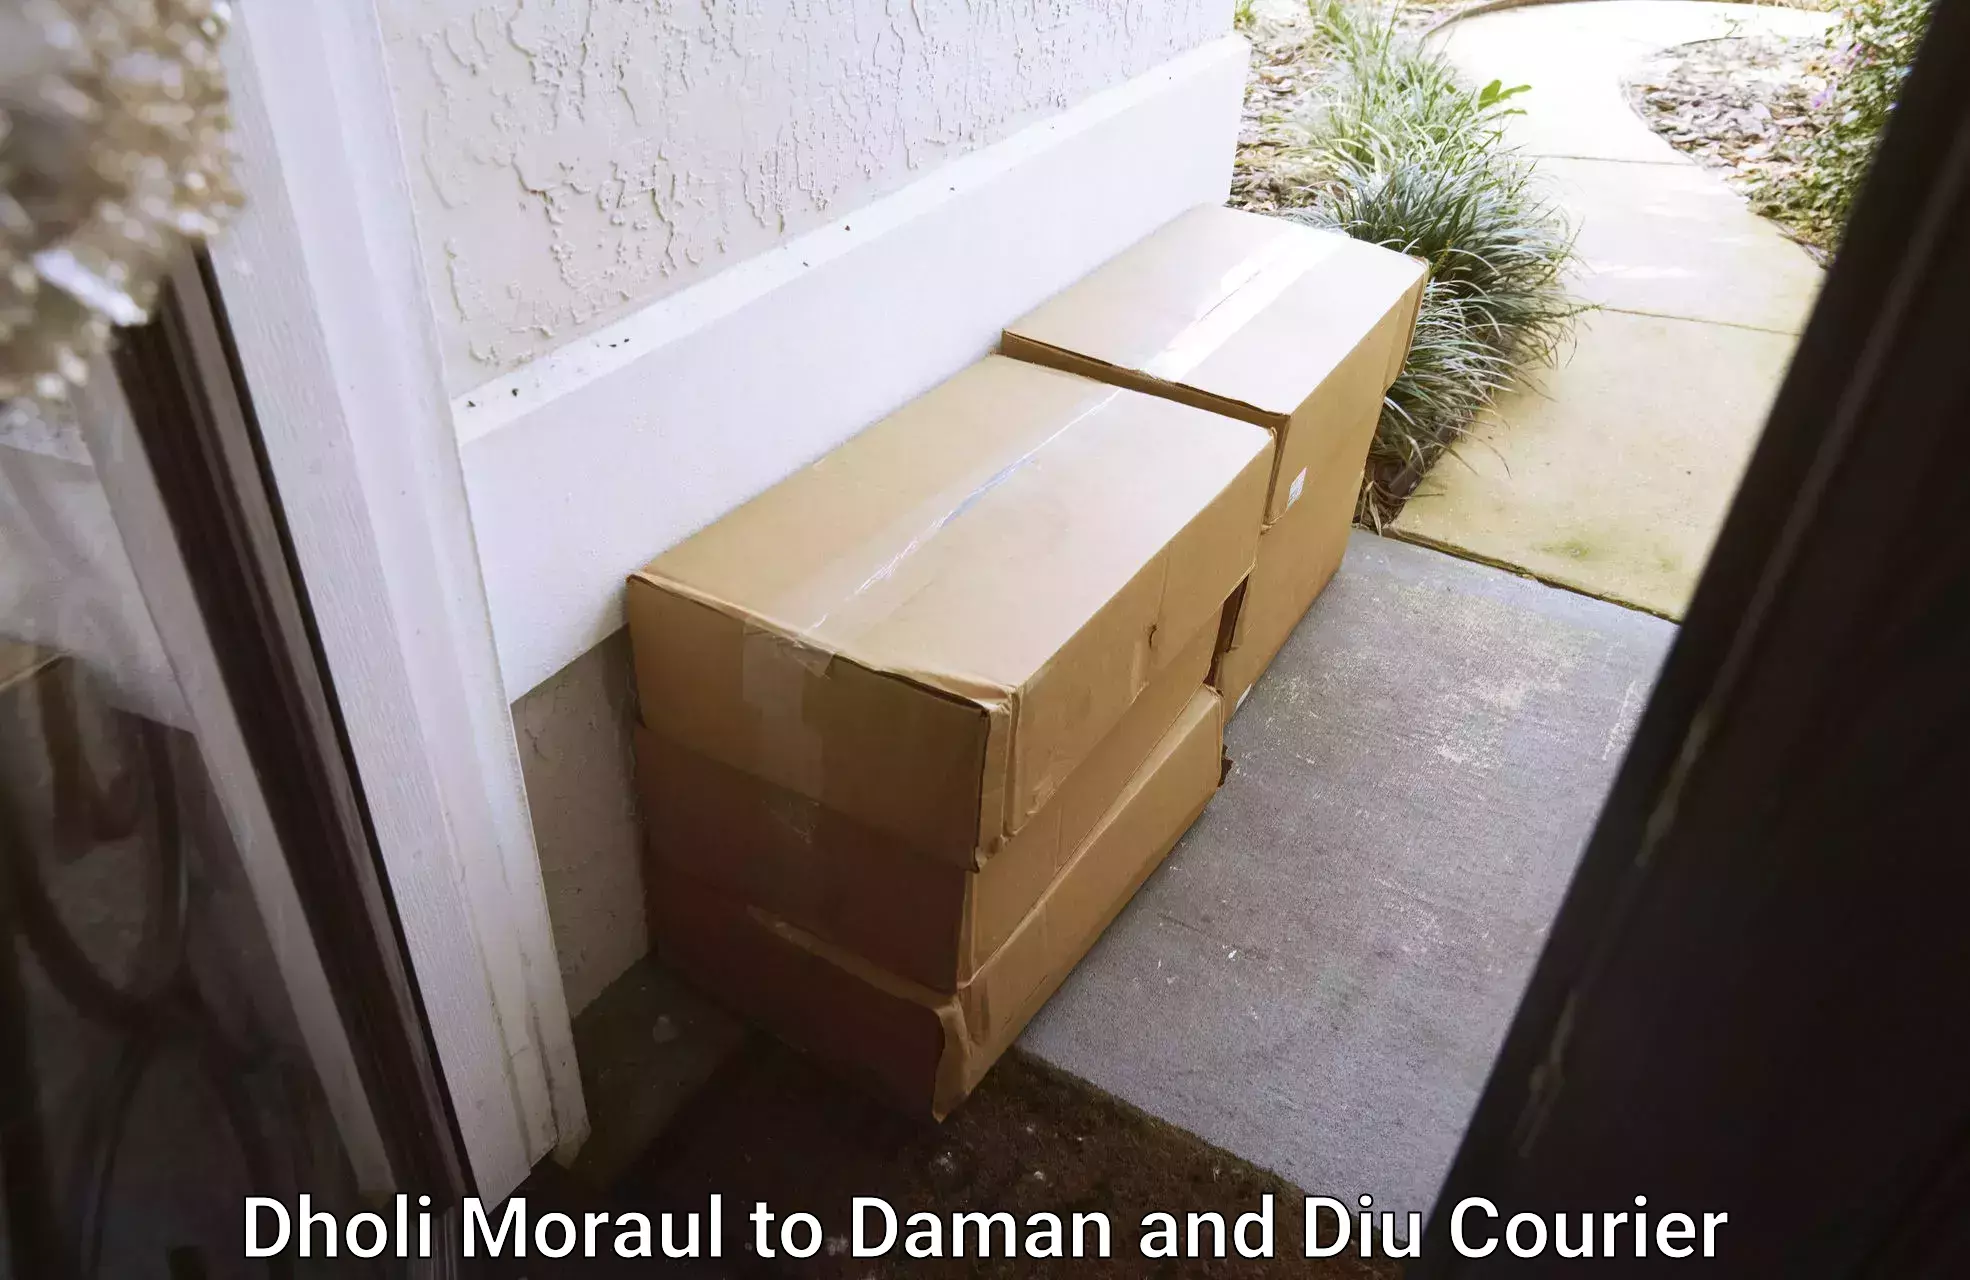 Moving and packing experts Dholi Moraul to Diu